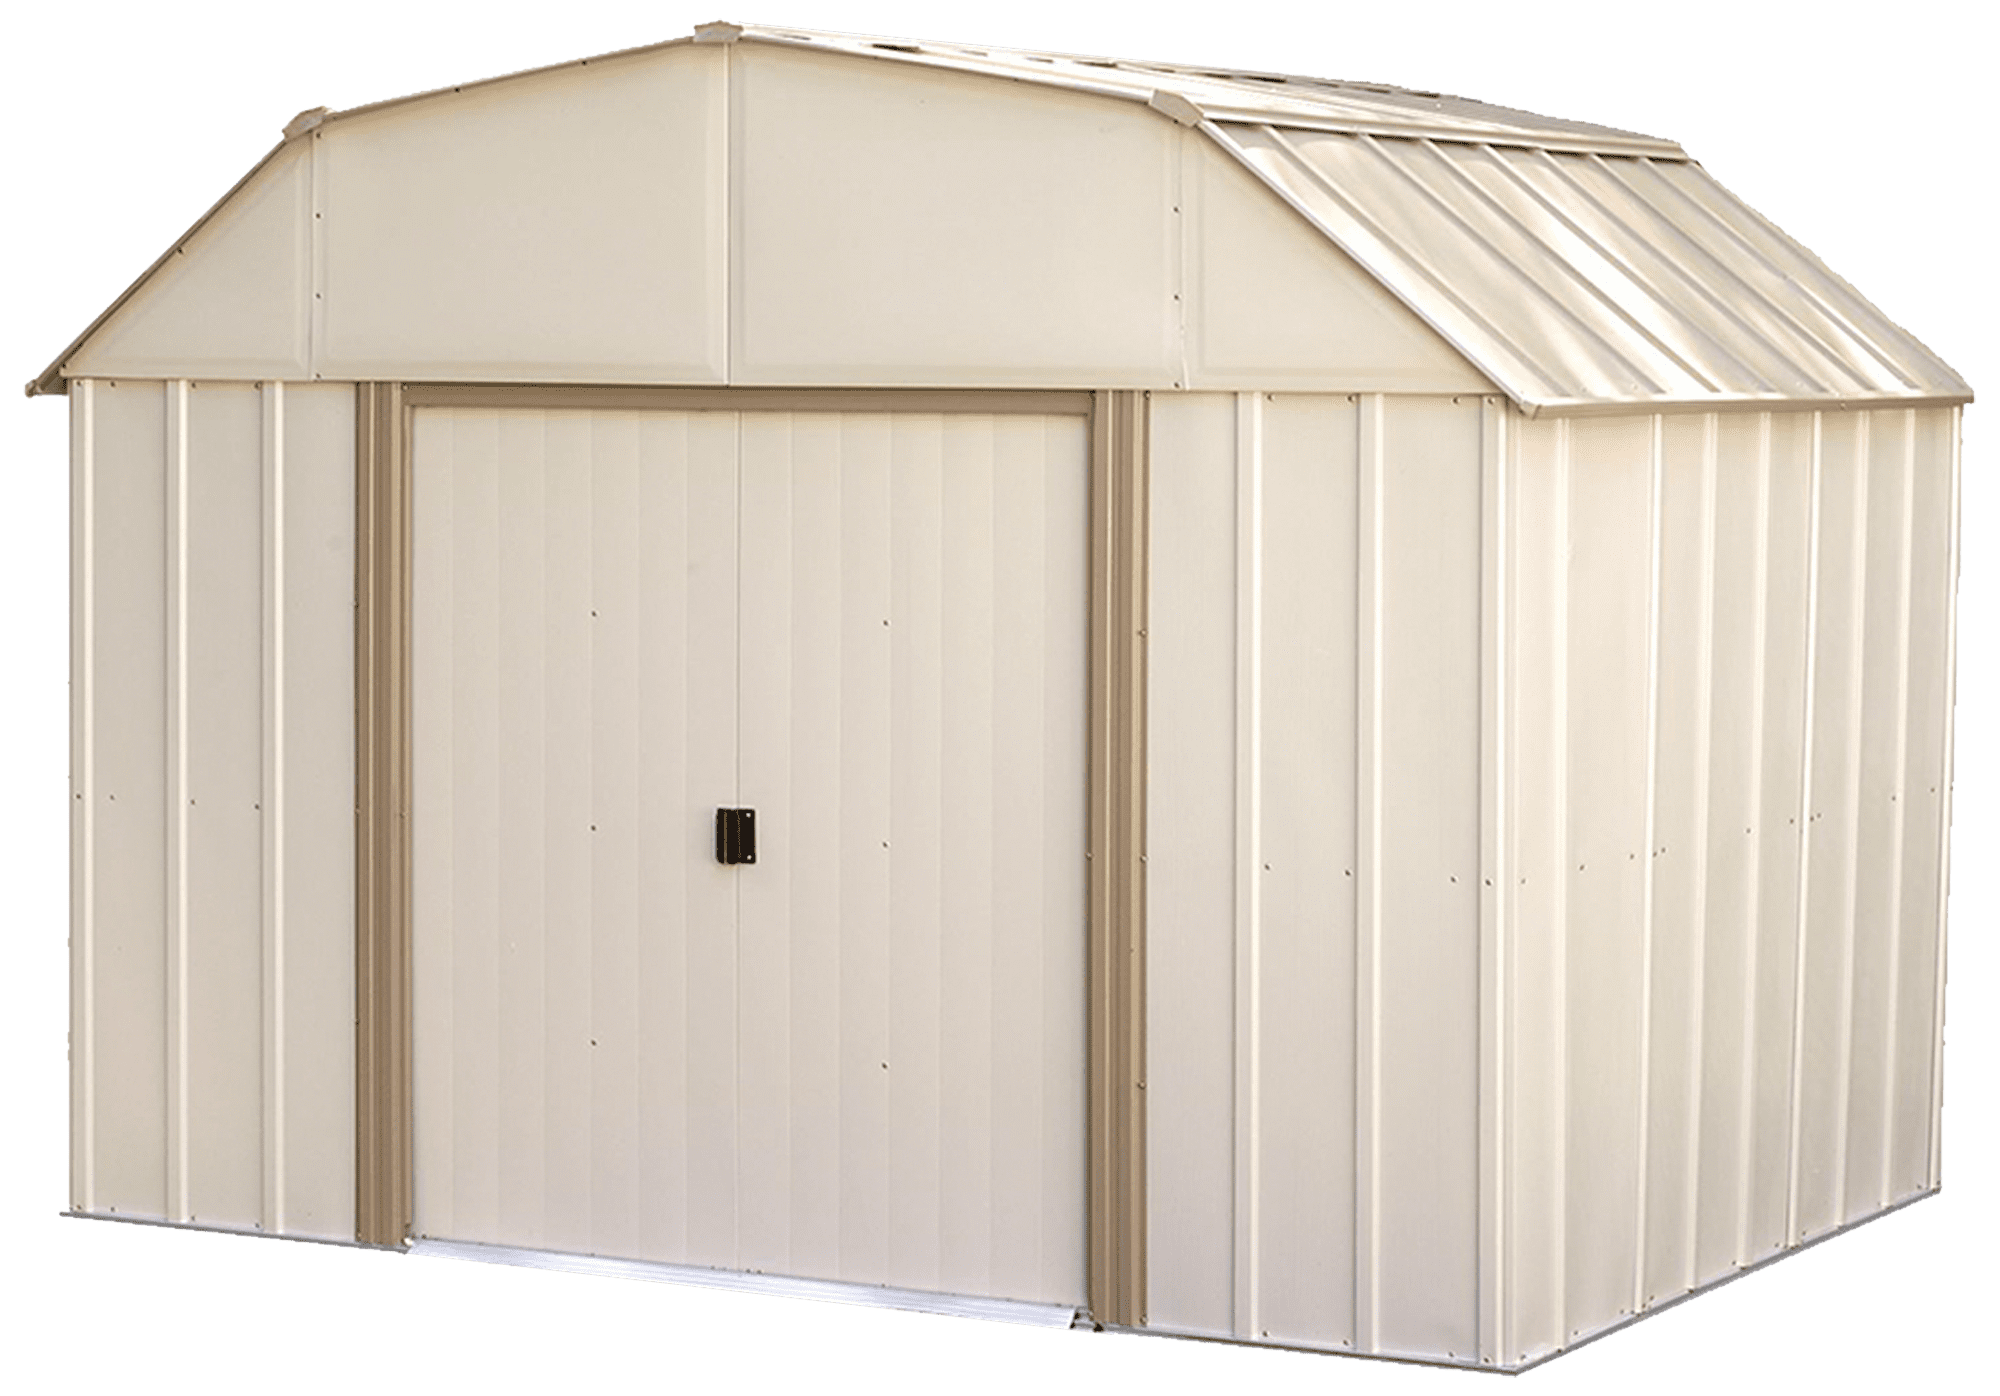 Steel Storage Shed 10 x 8 ft. Barn Style Galvanized Taupe/Eggshell 